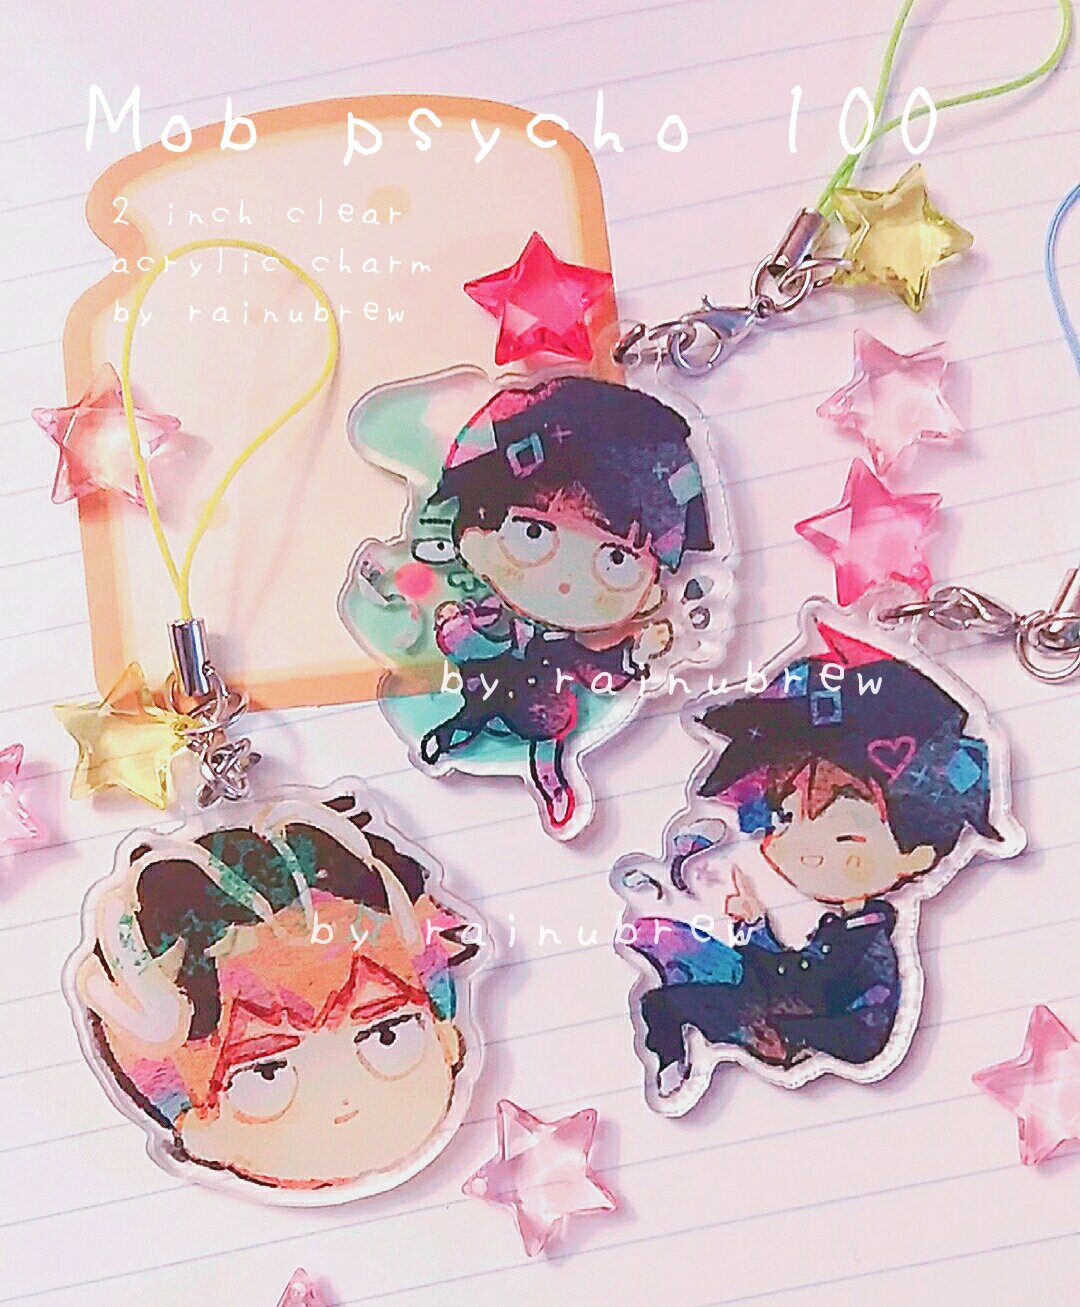 Image of Mob Psycho 100 | 2 inch charms